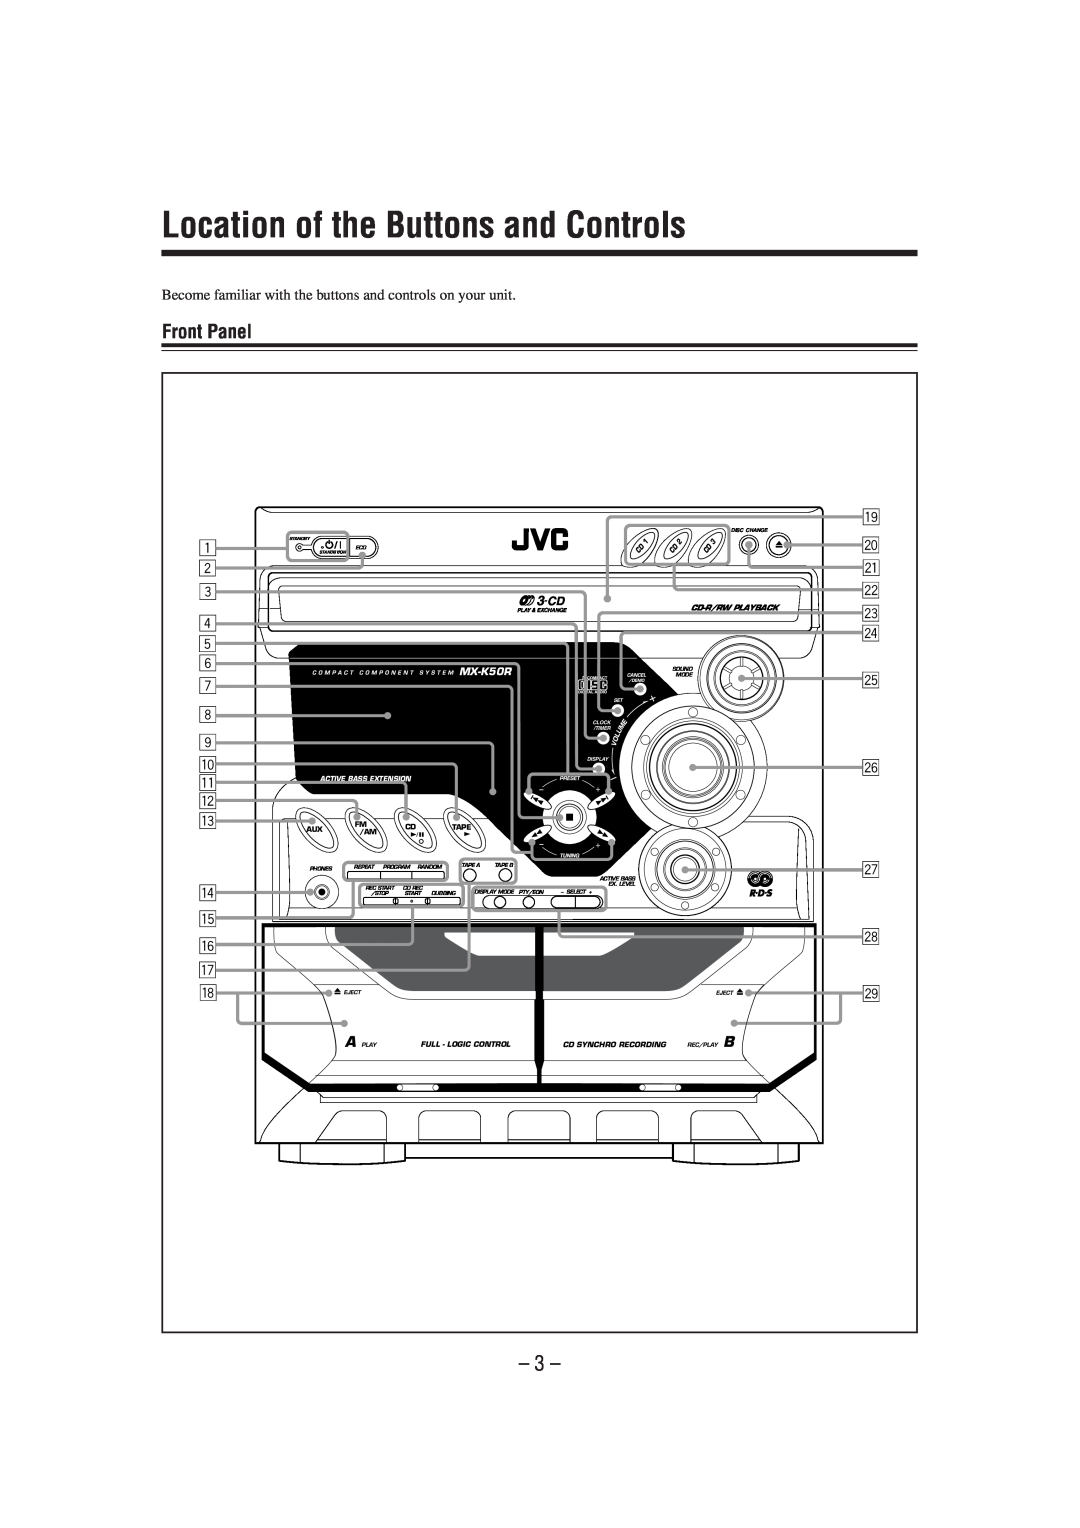 JVC CA-MXK50R manual Location of the Buttons and Controls, Front Panel 